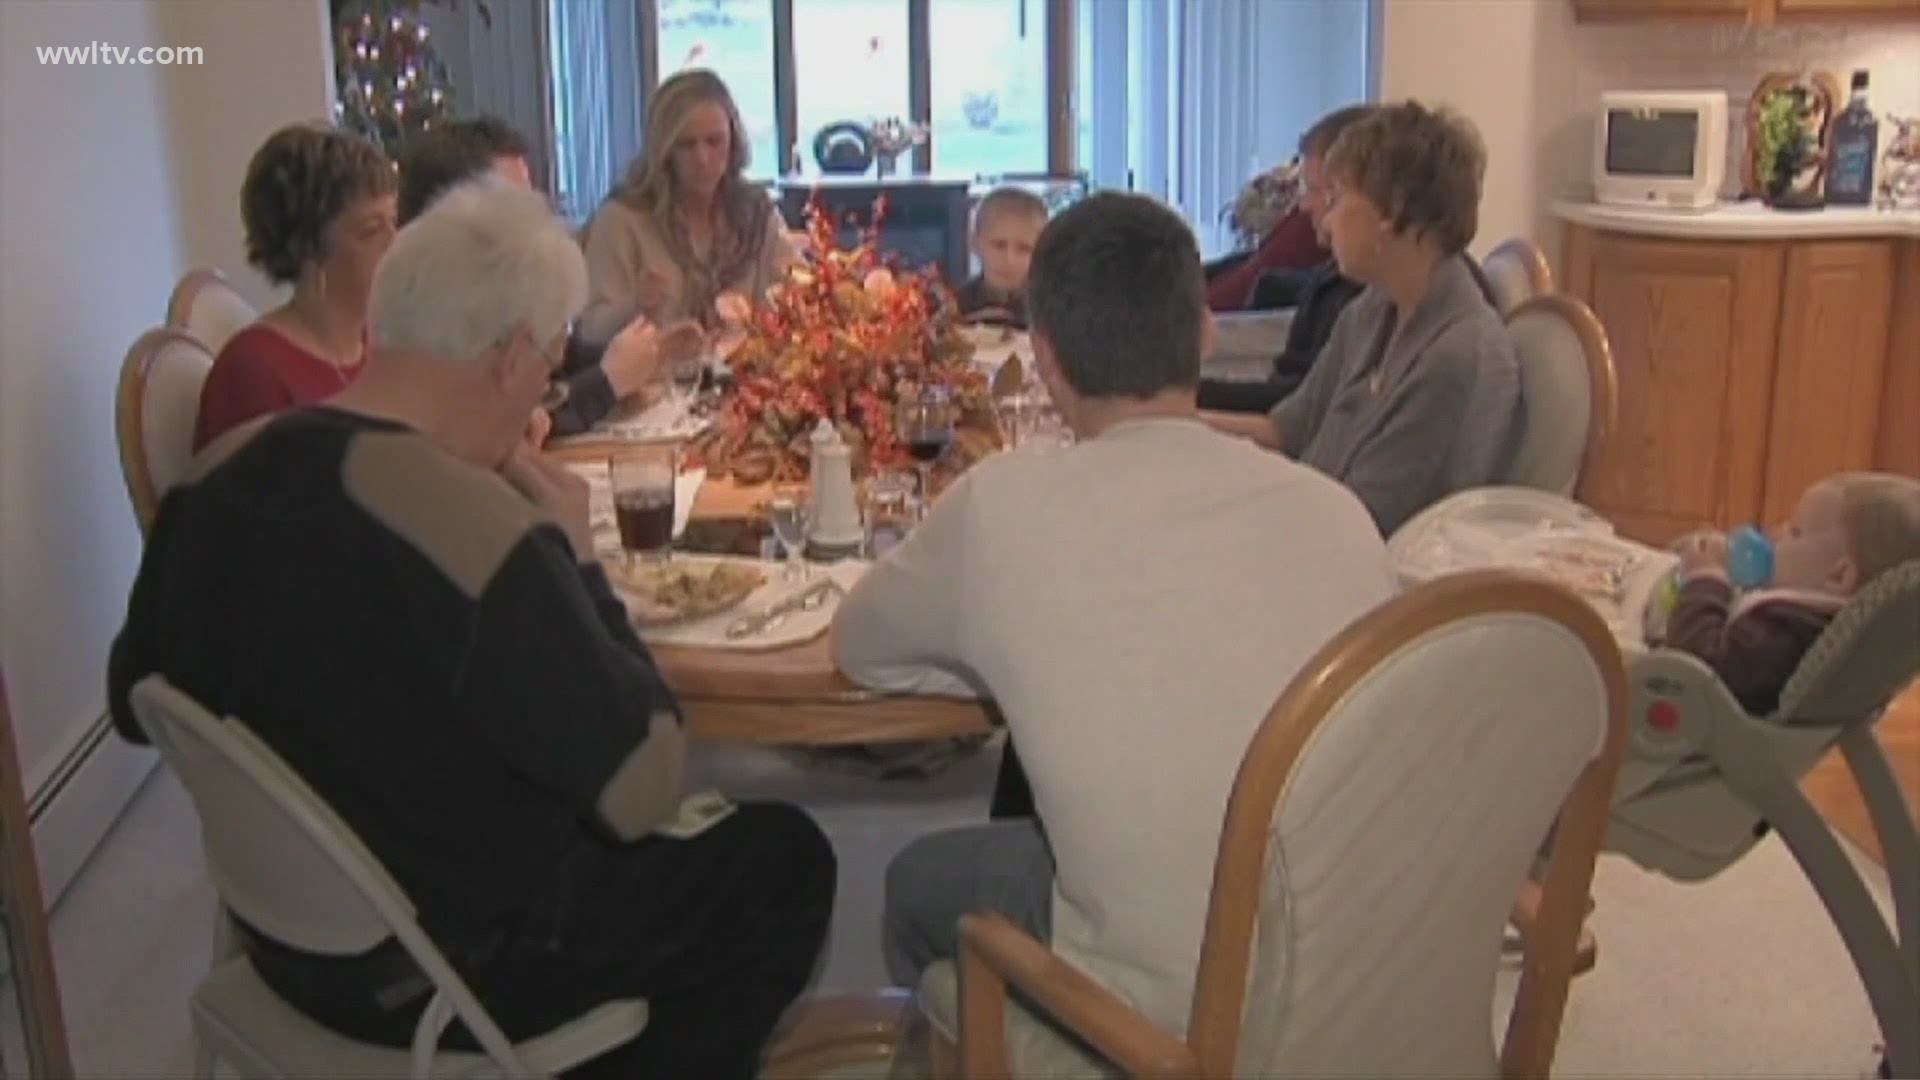 Experts are advising everyone to make adjustments for their holiday season to keep families protected from COVID-19.